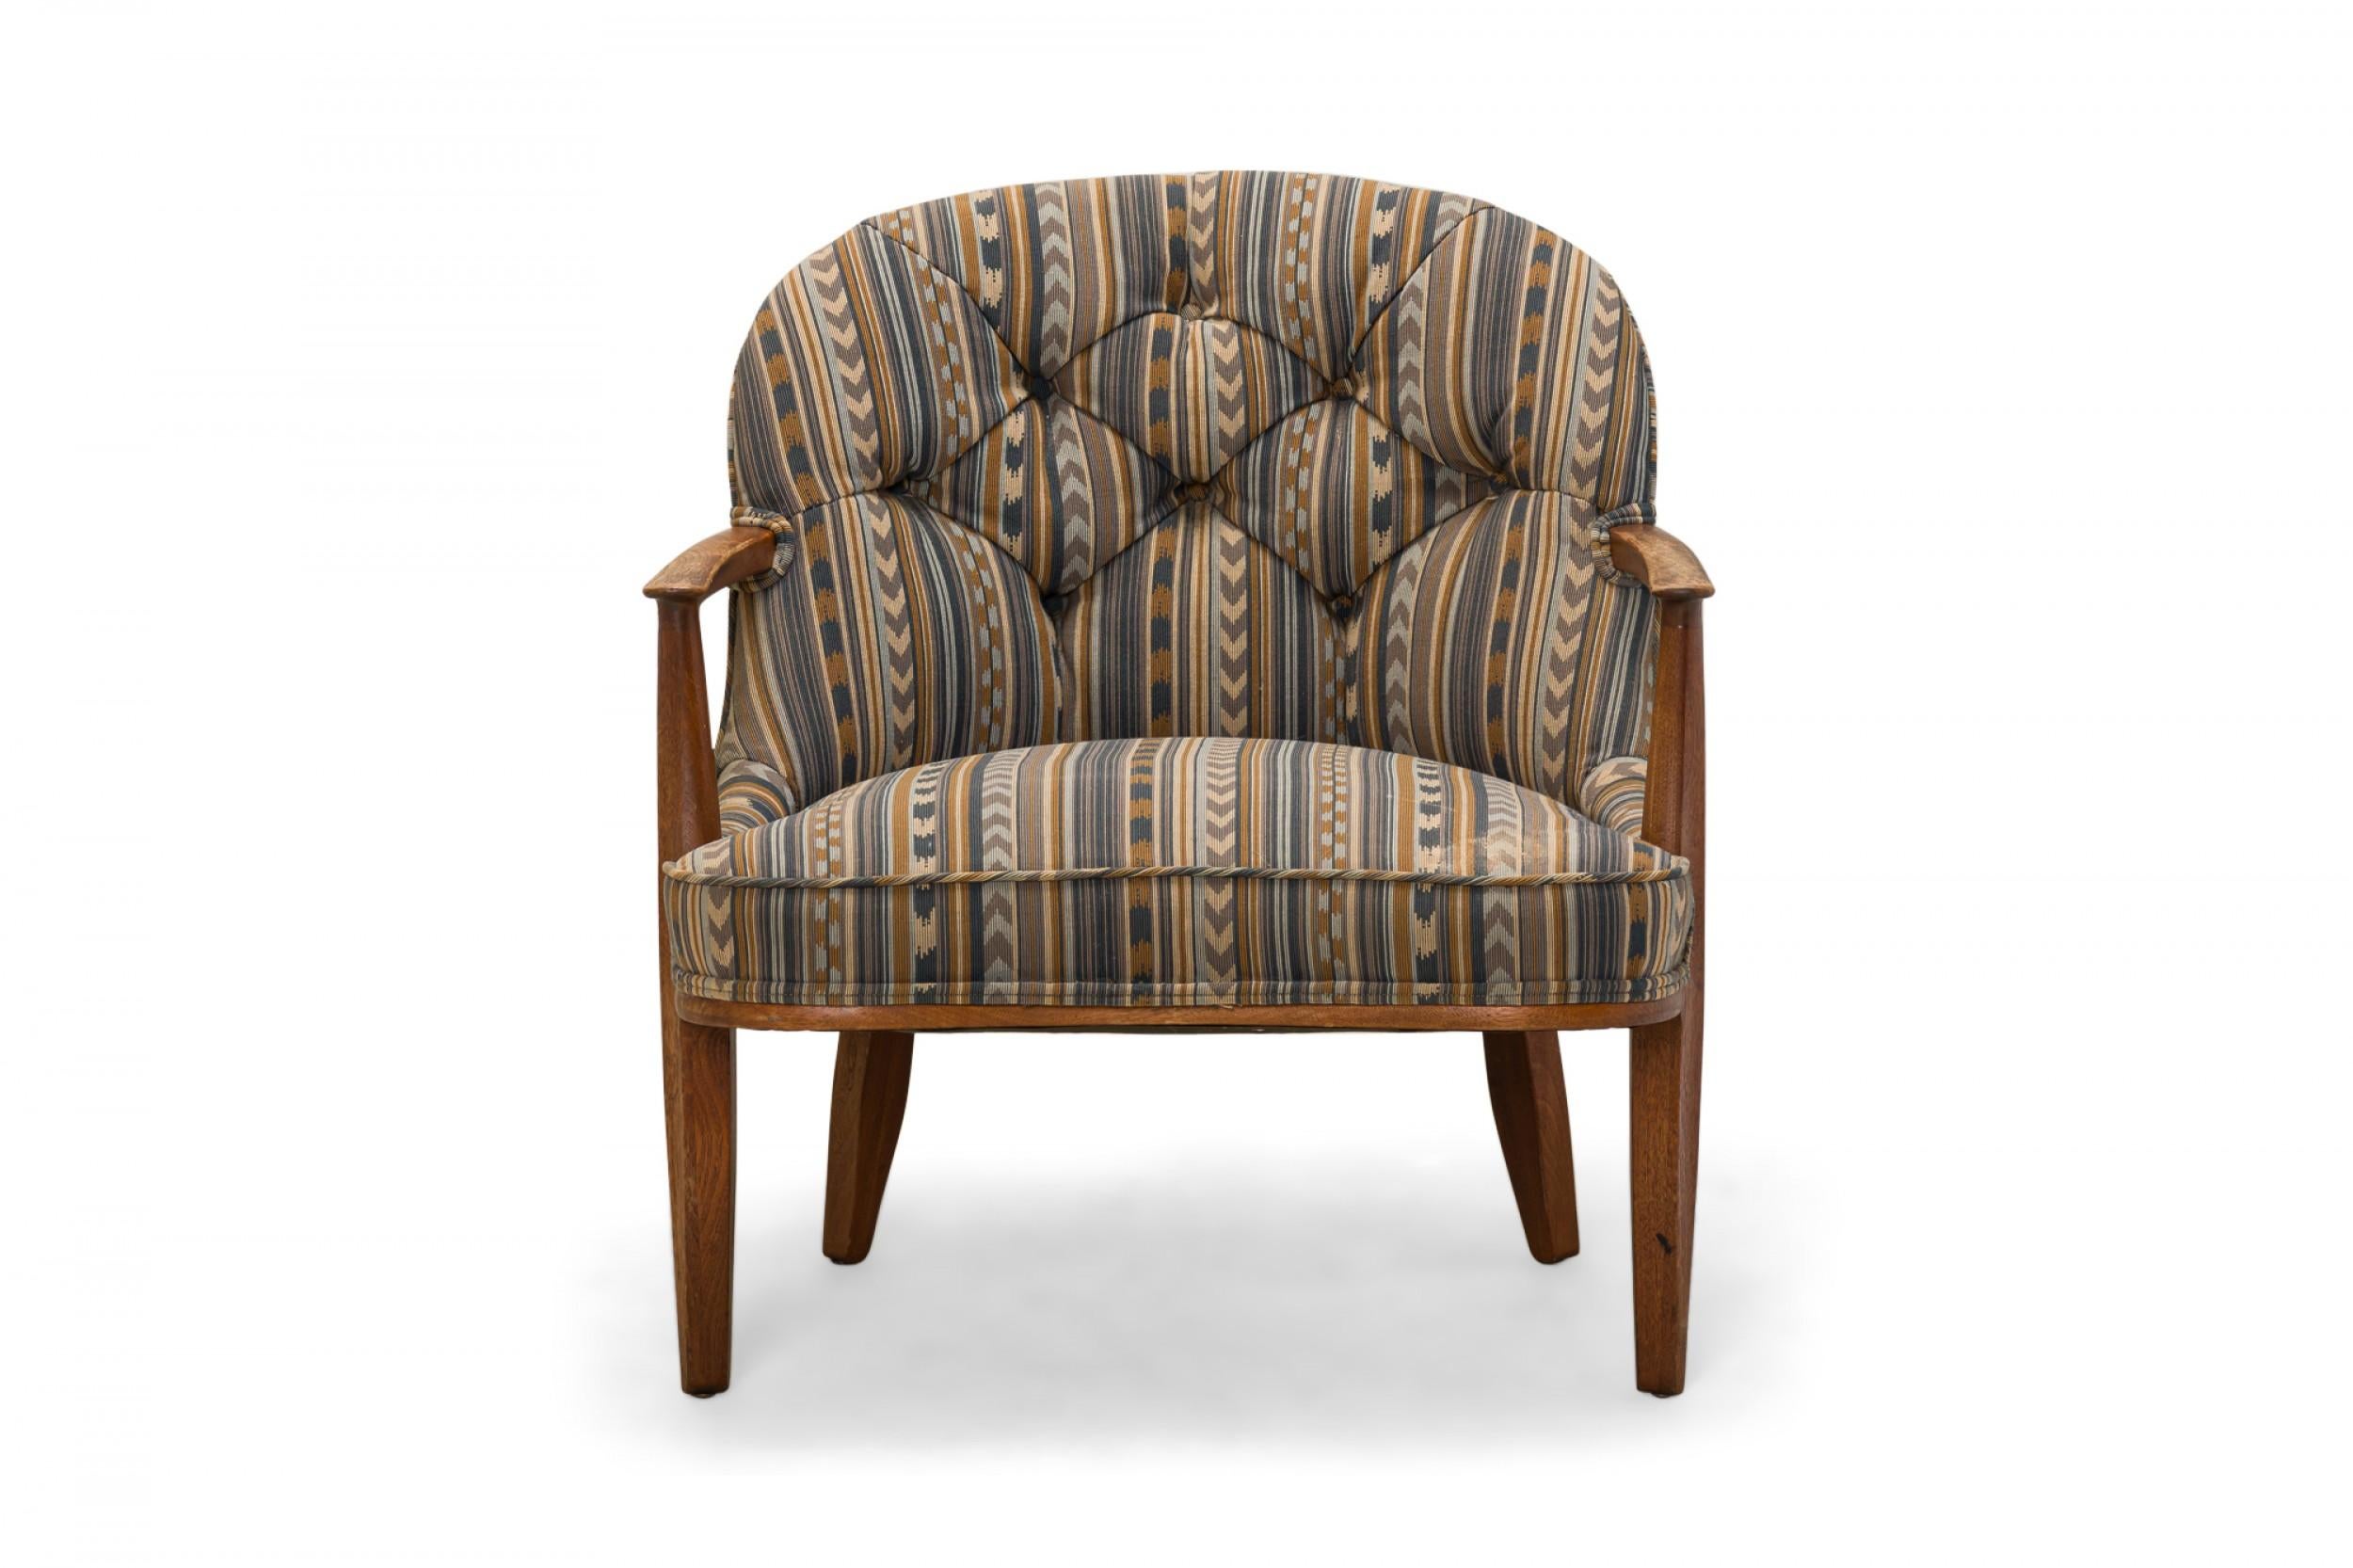 American Mid-Century 'Janus' lounge / armchair with a walnut frame and blue, beige, and brown geometric stripe patterned fabric upholstery with a button tufted back, resting on four slightly tapered walnut legs. (EDWARD J WORMLEY FOR DUNBAR